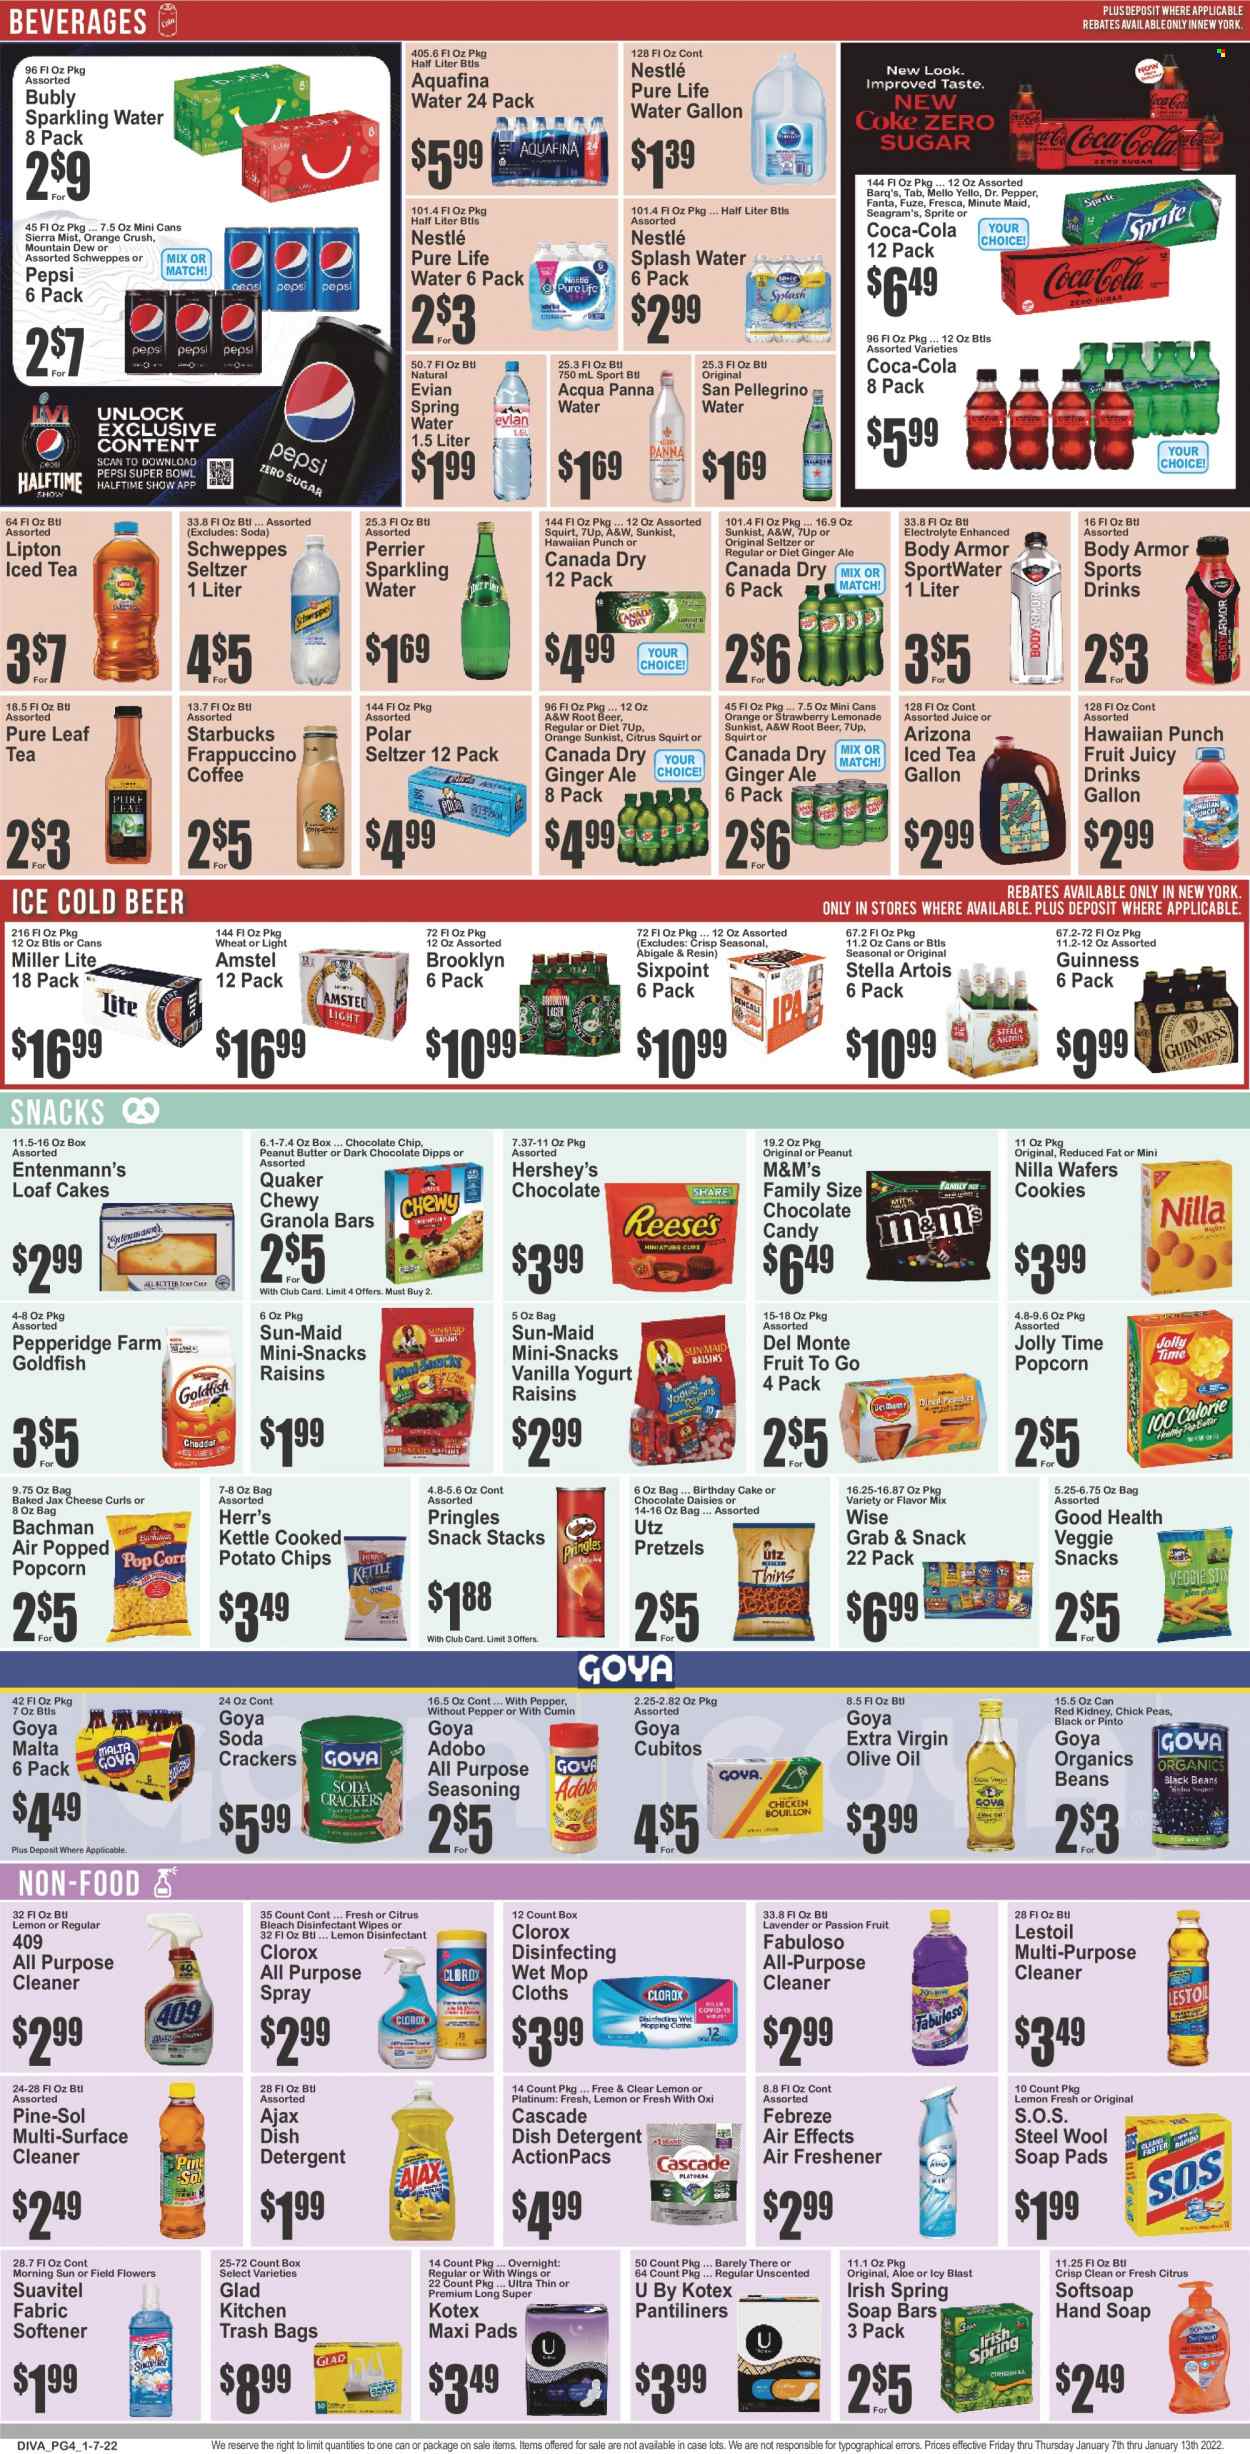 thumbnail - Key Food Flyer - 01/07/2022 - 01/13/2022 - Sales products - pretzels, cake, Entenmann's, oranges, Quaker, cheese, yoghurt, Hershey's, cookies, Nestlé, wafers, snack, M&M's, crackers, chocolate candies, potato chips, Pringles, chips, popcorn, Goldfish, Goya, granola bar, spice, cumin, adobo sauce, extra virgin olive oil, olive oil, oil, peanut butter, raisins, dried fruit, Canada Dry, Coca-Cola, ginger ale, lemonade, Mountain Dew, Schweppes, Sprite, Pepsi, juice, Fanta, Body Armor, Lipton, ice tea, Dr. Pepper, 7UP, AriZona, A&W, Sierra Mist, Perrier, fruit punch, Aquafina, seltzer water, spring water, soda, sparkling water, Pure Life Water, Evian, San Pellegrino, Pure Leaf, coffee, Starbucks, frappuccino, beer, Guinness, wipes, detergent, Febreze, surface cleaner, cleaner, bleach, desinfection, all purpose cleaner, Clorox, Ajax, Pine-Sol, Fabuloso, Cascade, fabric softener, Softsoap, hand soap, soap, pantiliners, sanitary pads, Kotex, trash bags, mop pad, air freshener, Miller Lite, Stella Artois. Page 4.